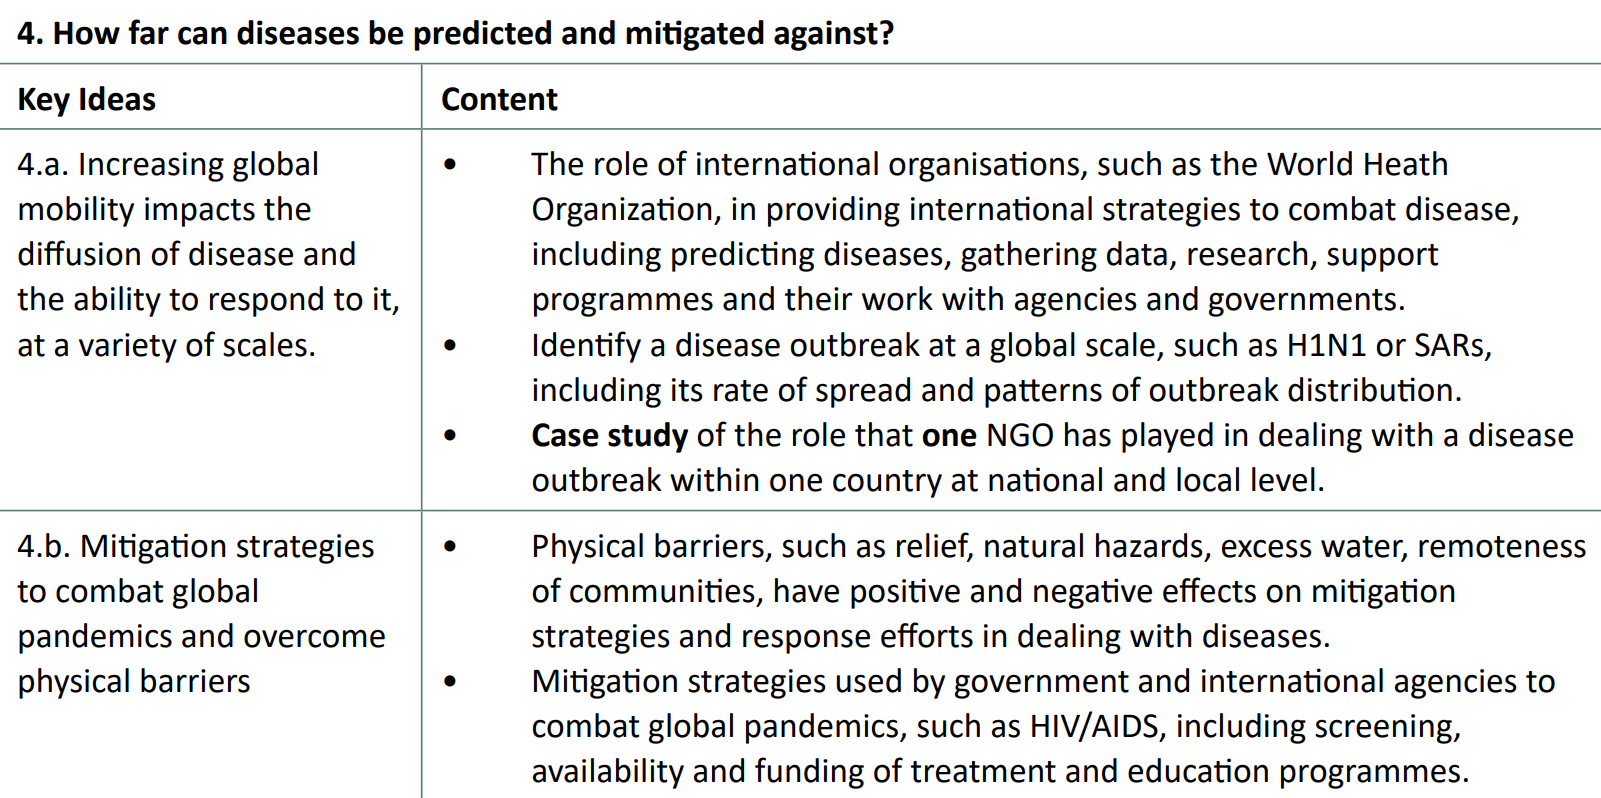 Specification Content for Disease Dilemmas Key Idea 4 - "How far can diseases be predicted and mitigated against?"